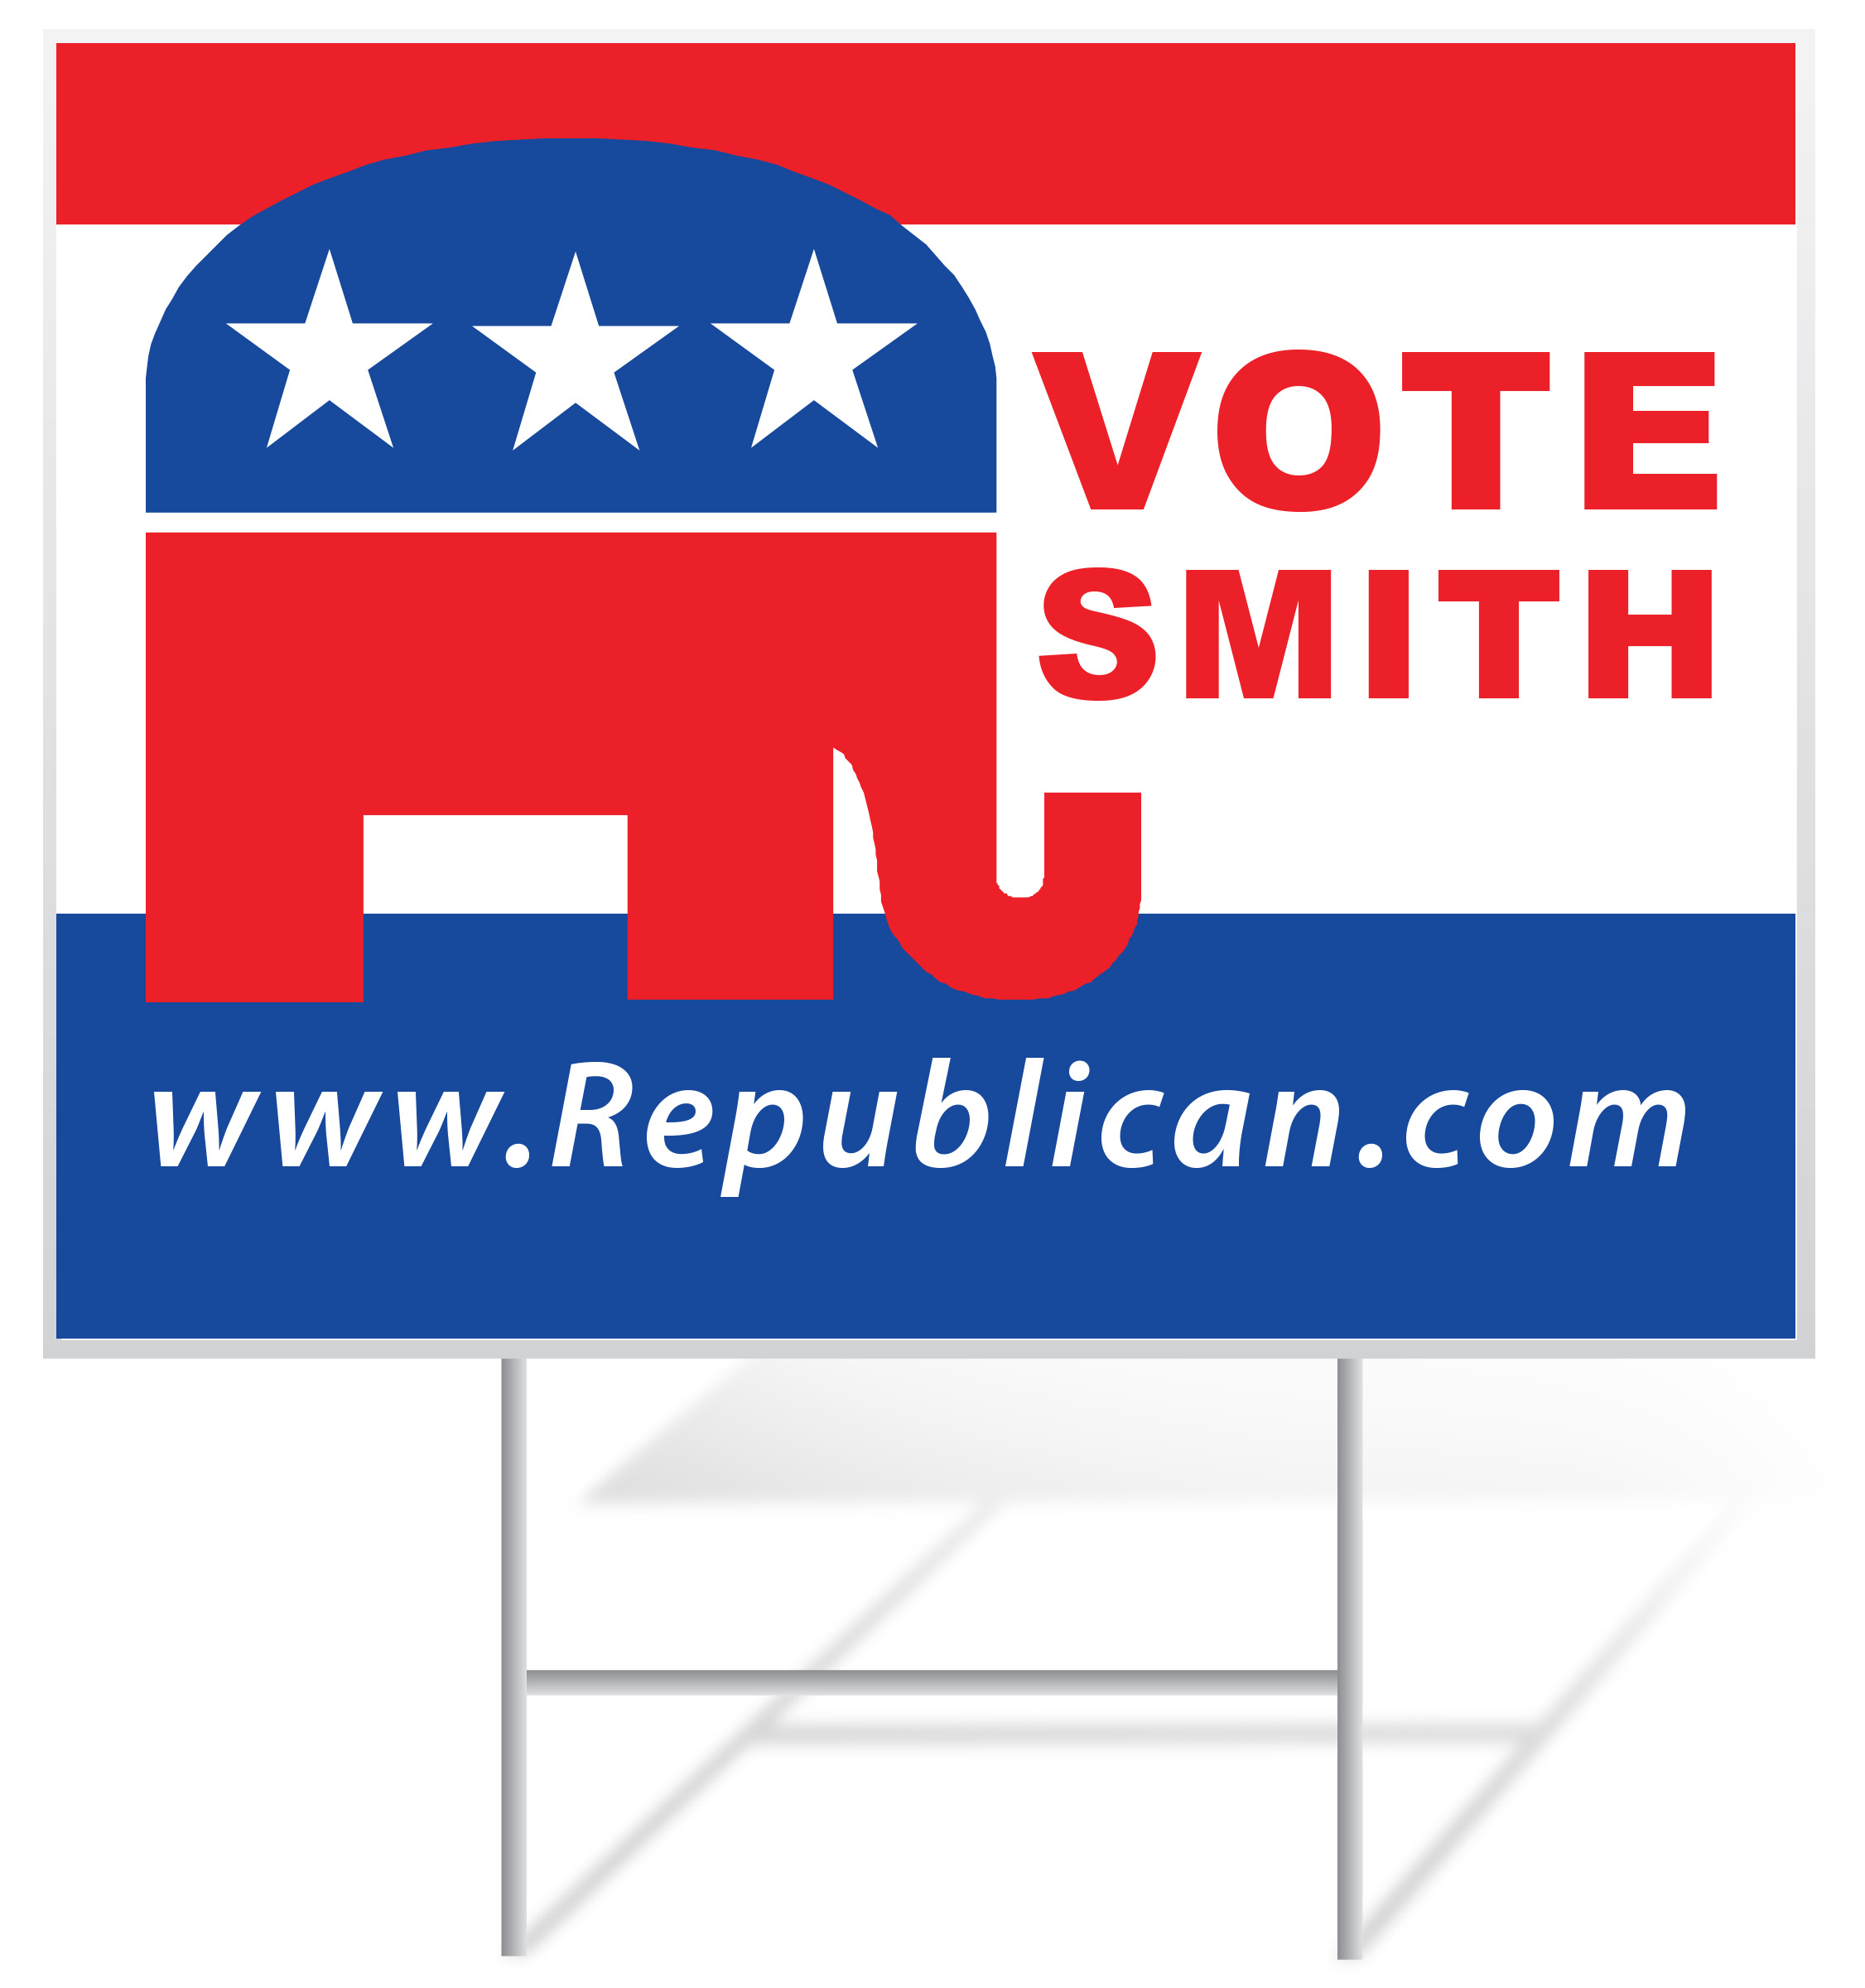 Republican Lawn Sign Example | LawnSigns.com